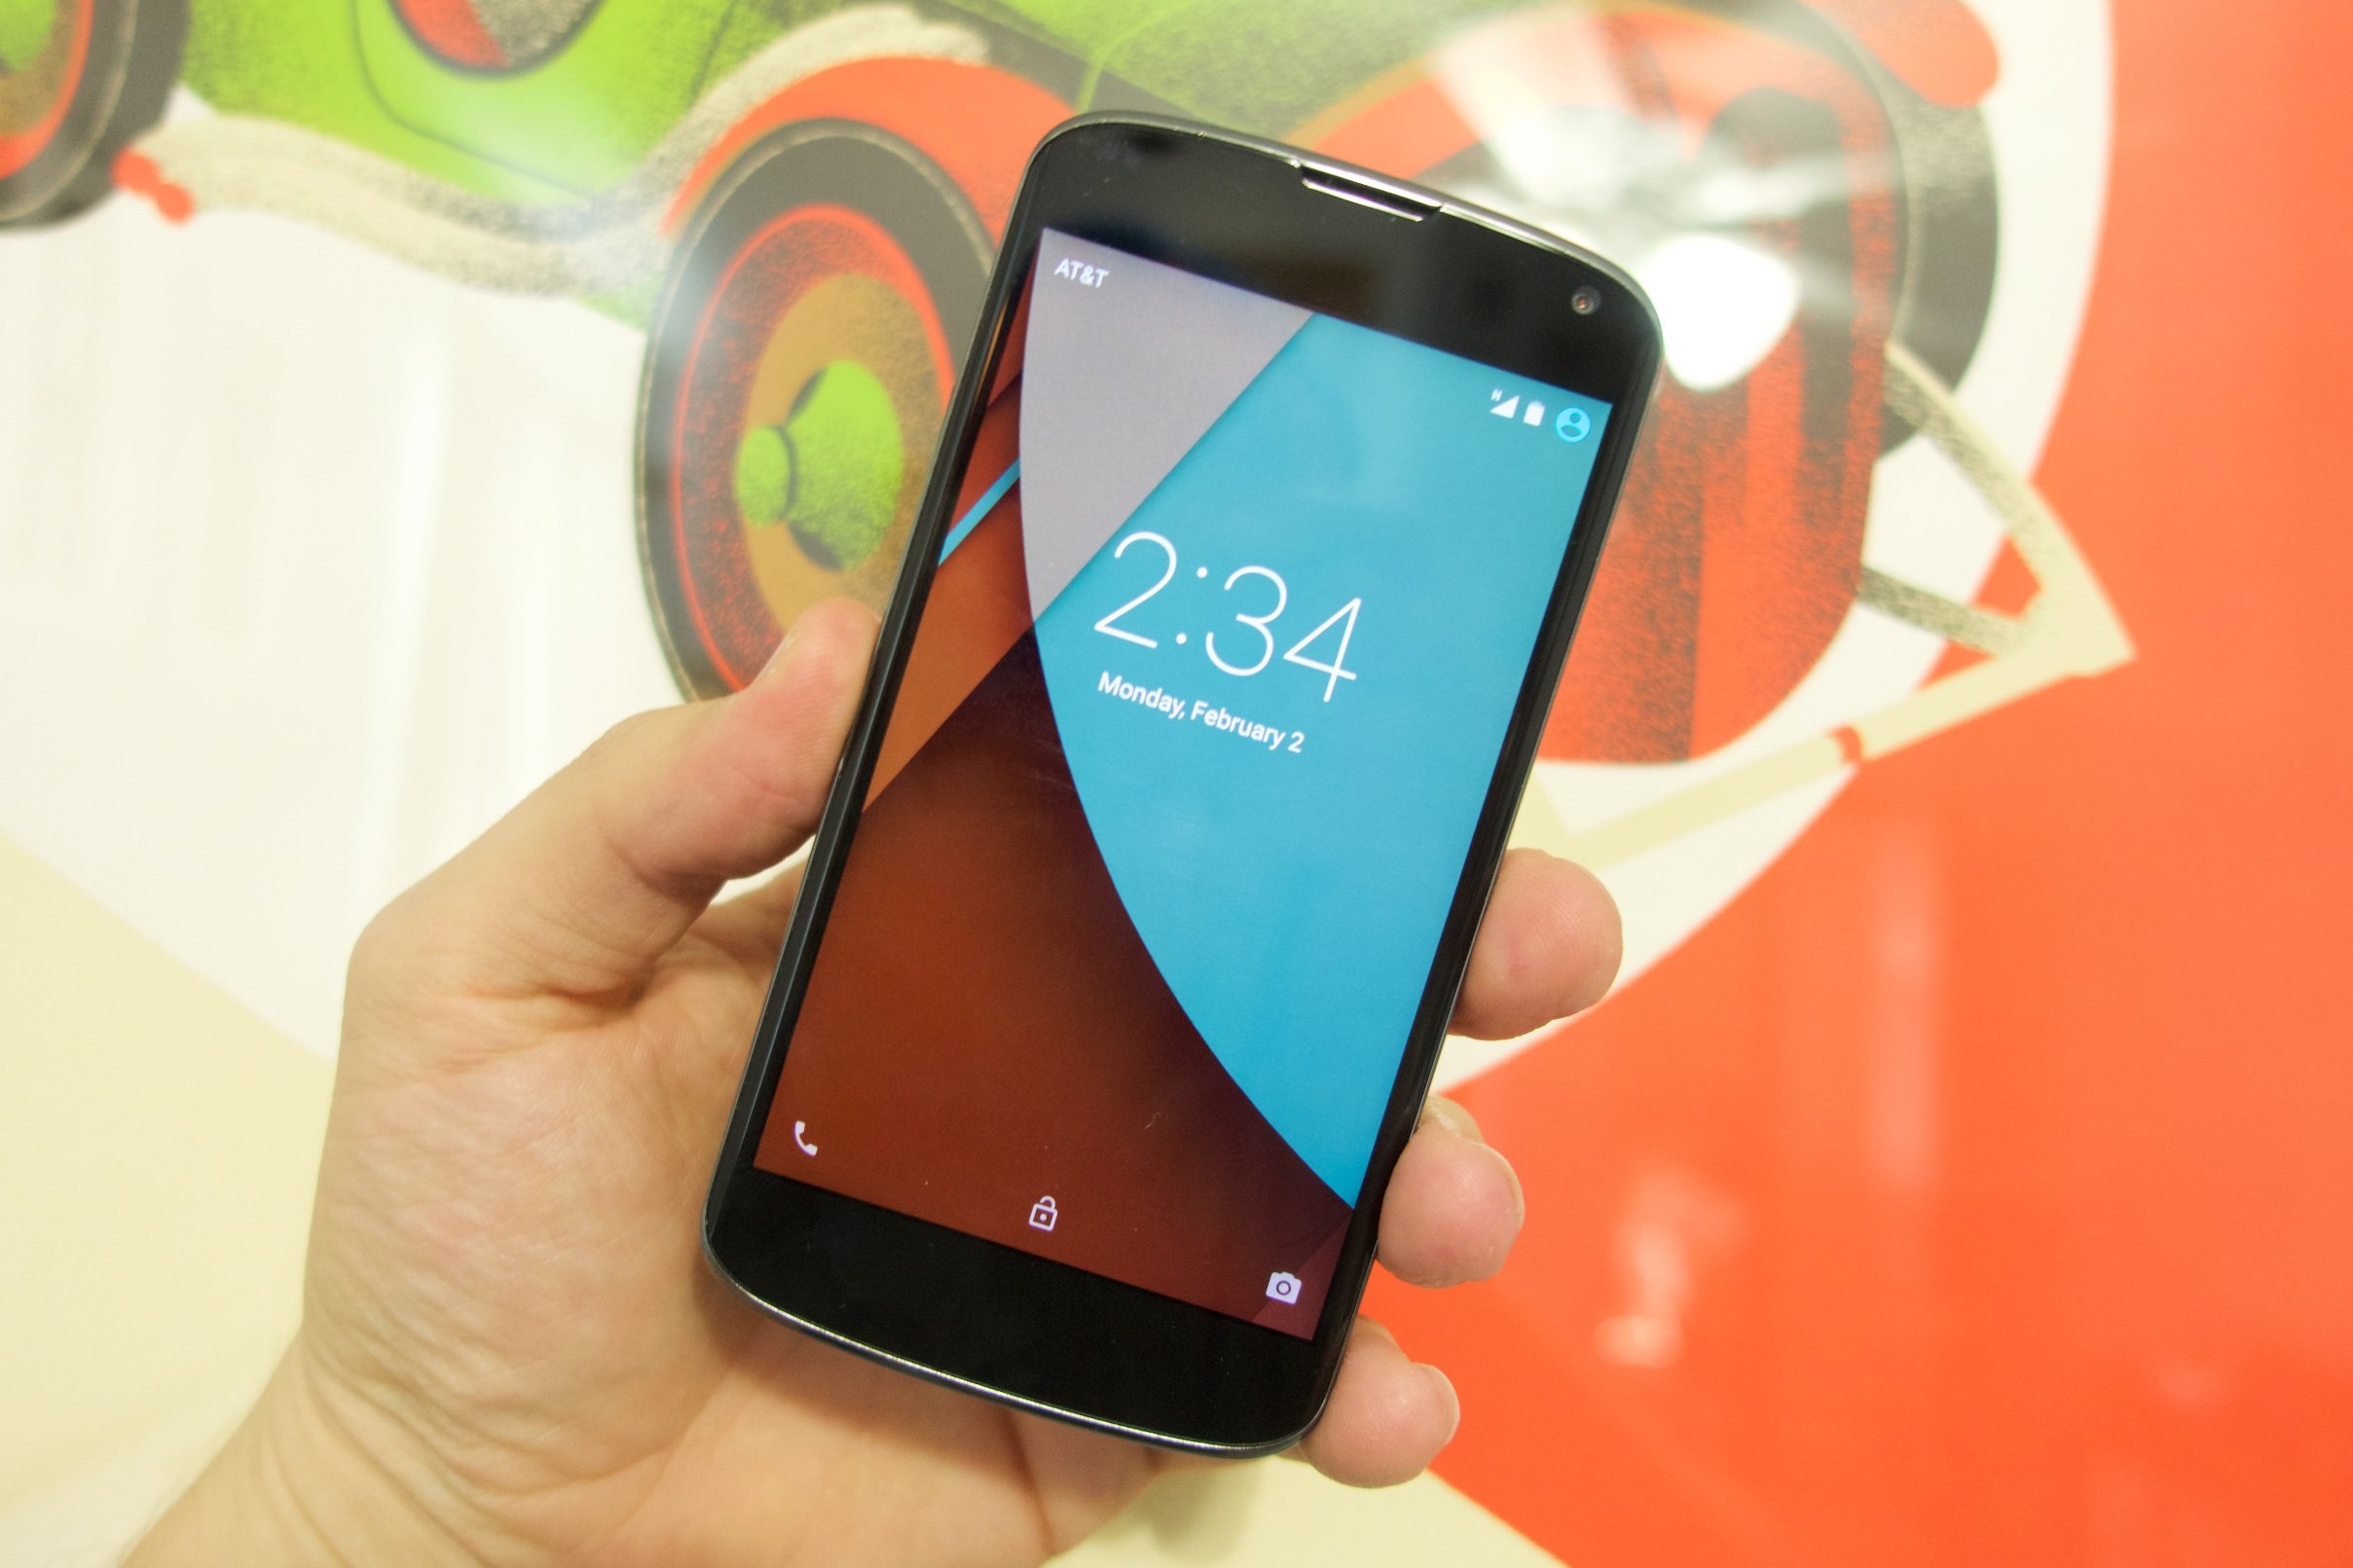 Here is what you need to know about the Nexus 4 Android 5.0.1 update.